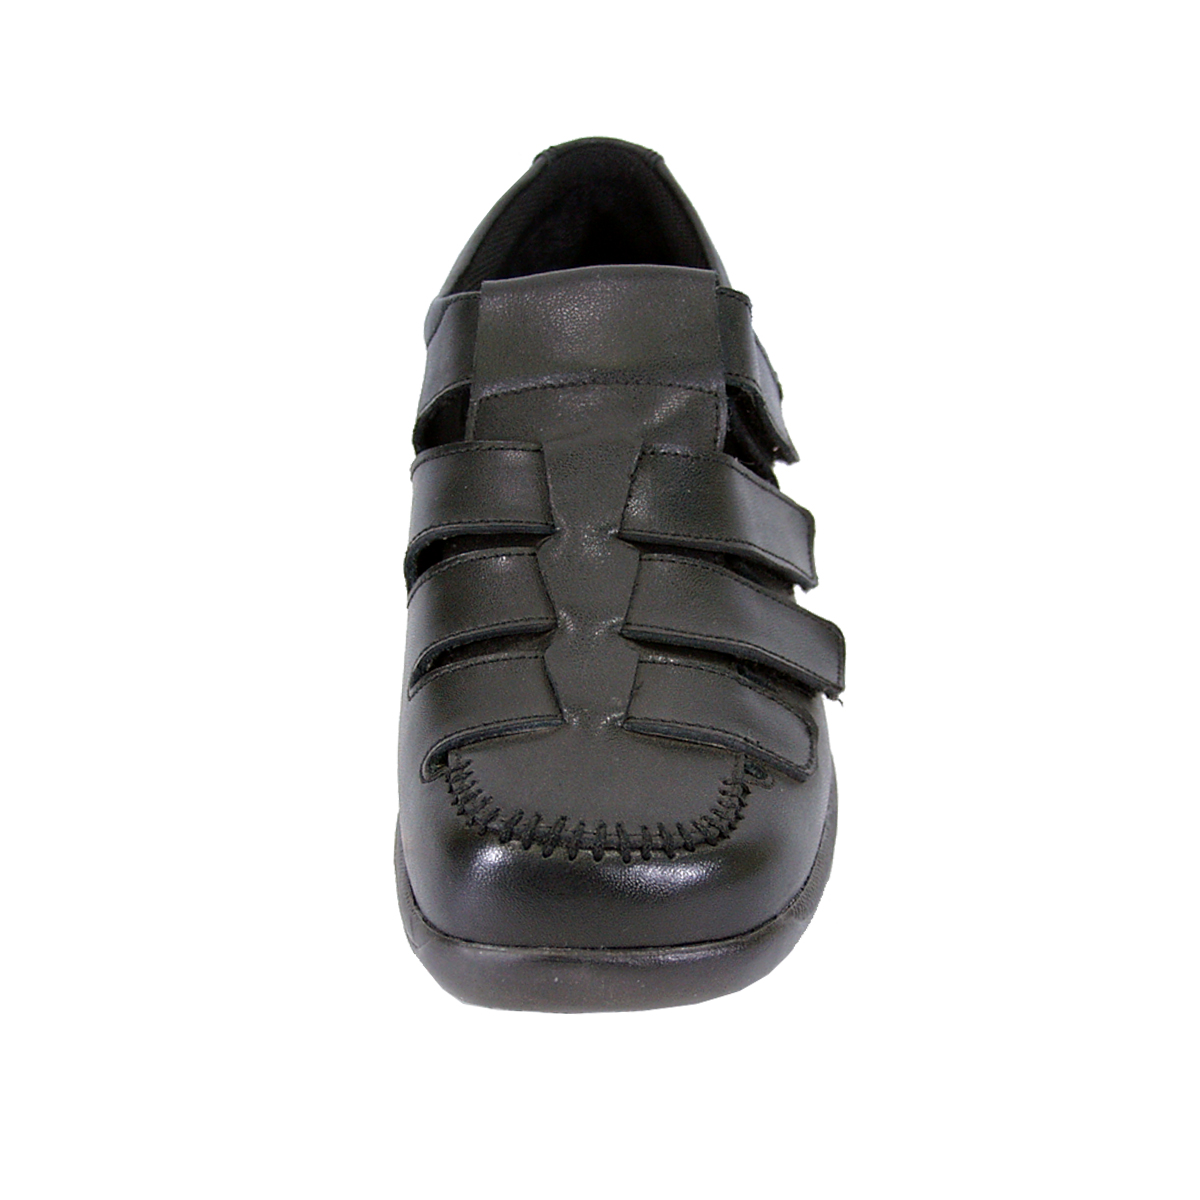 24 HOUR COMFORT Audrey Wide Width Comfort Shoes For Work and Casual Attire BLACK 6 - image 2 of 6